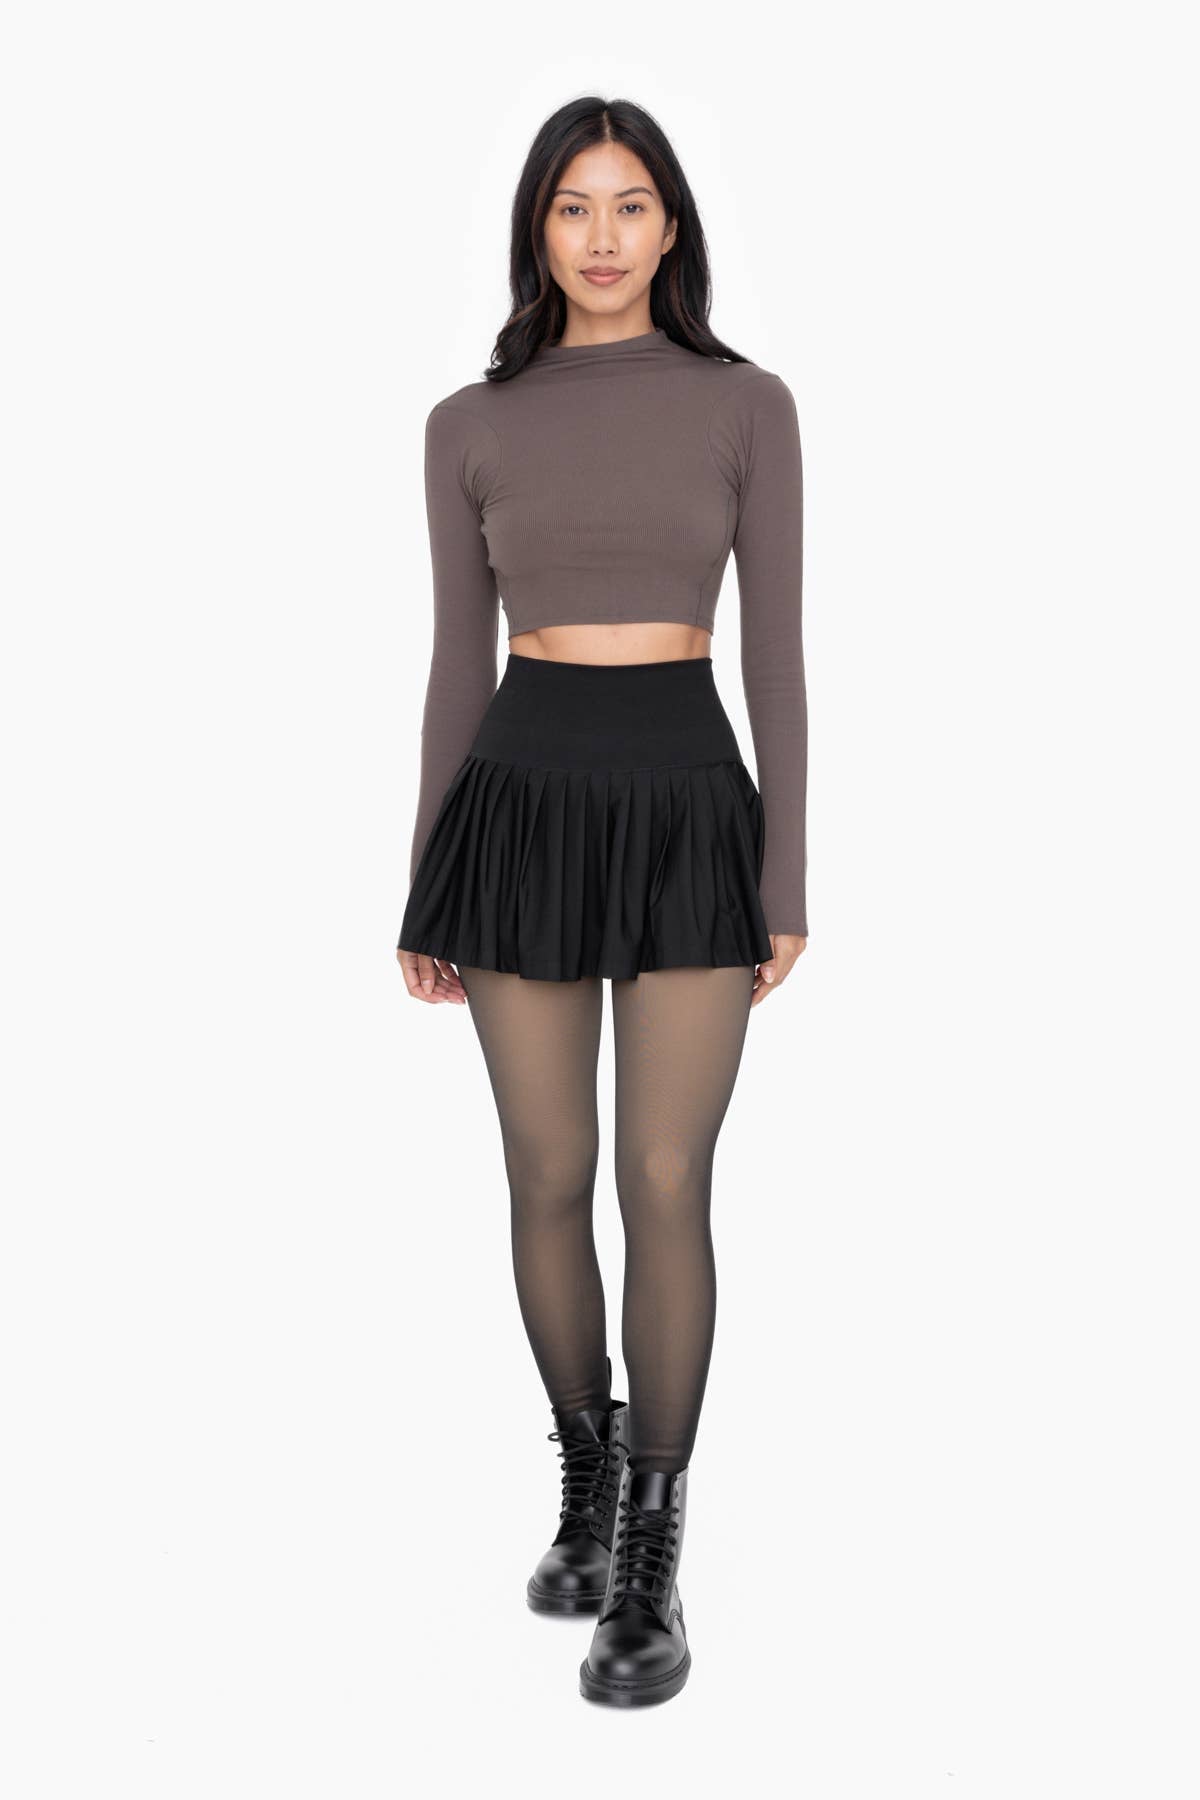 Taylor Fur Lined High-Waisted Tights